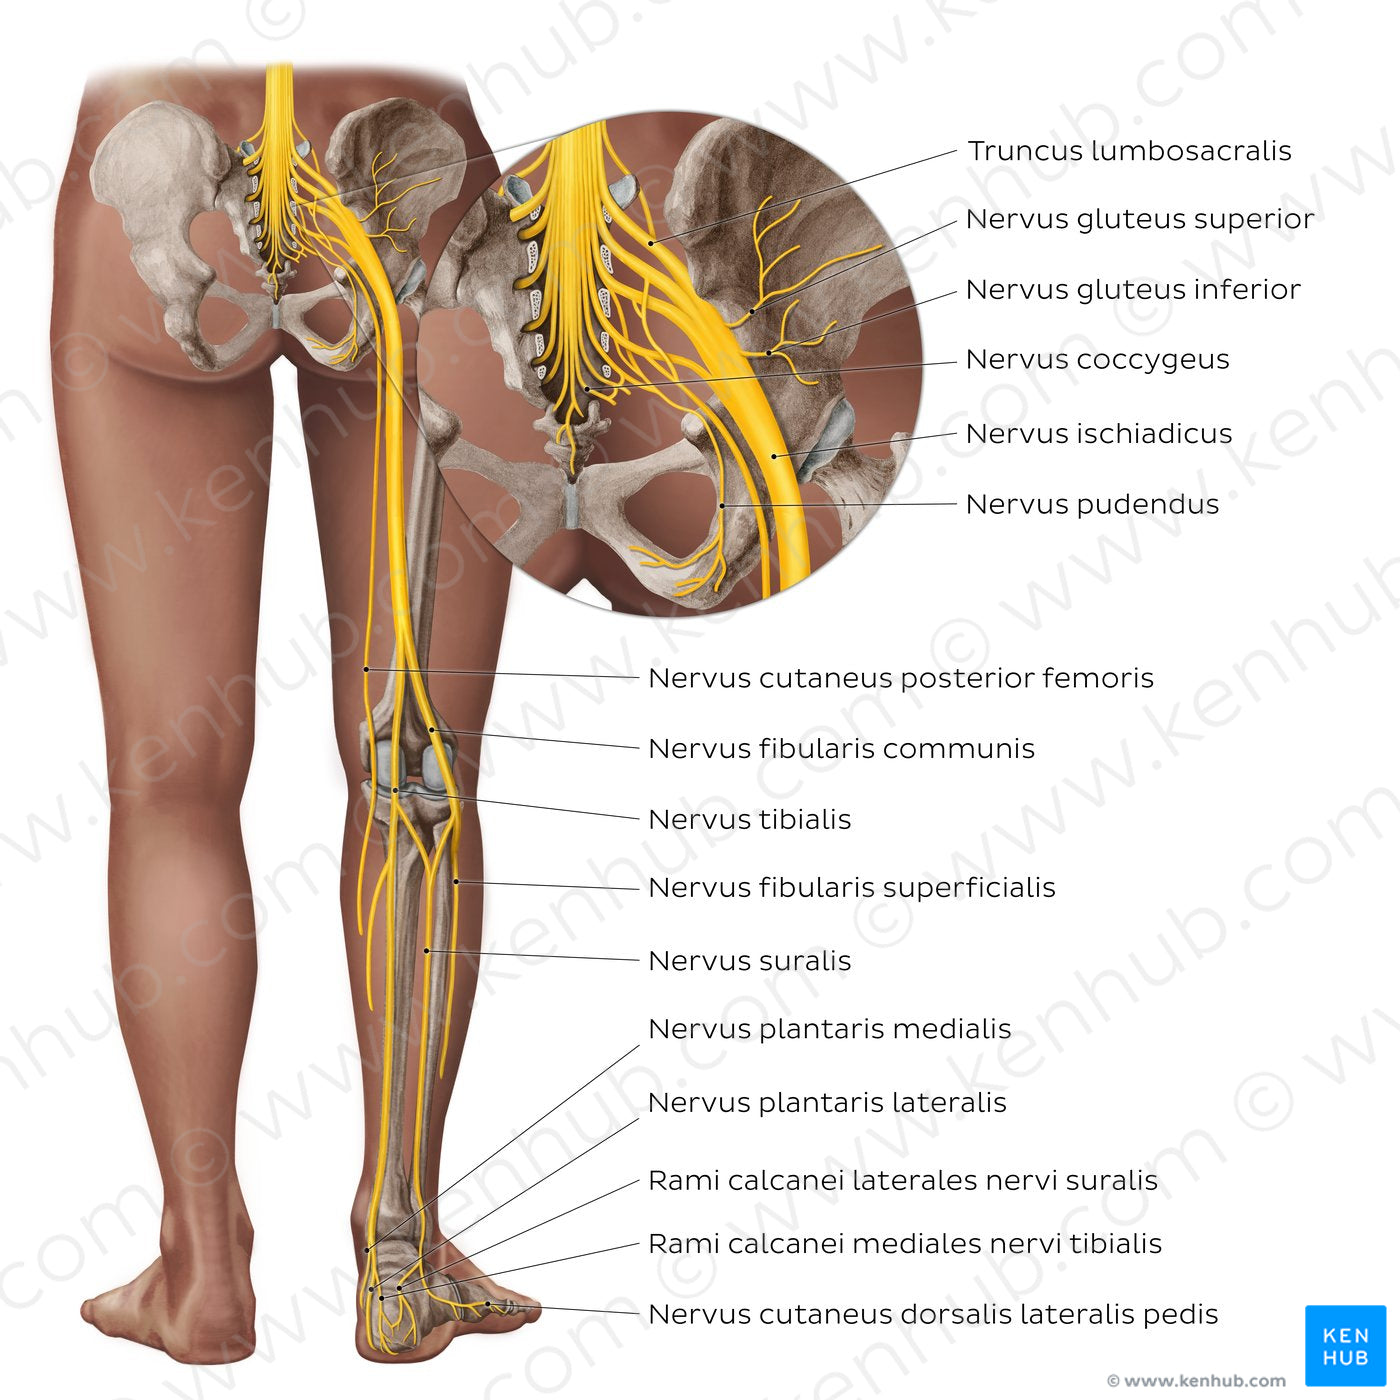 Sciatic nerve and its branches (Latin)